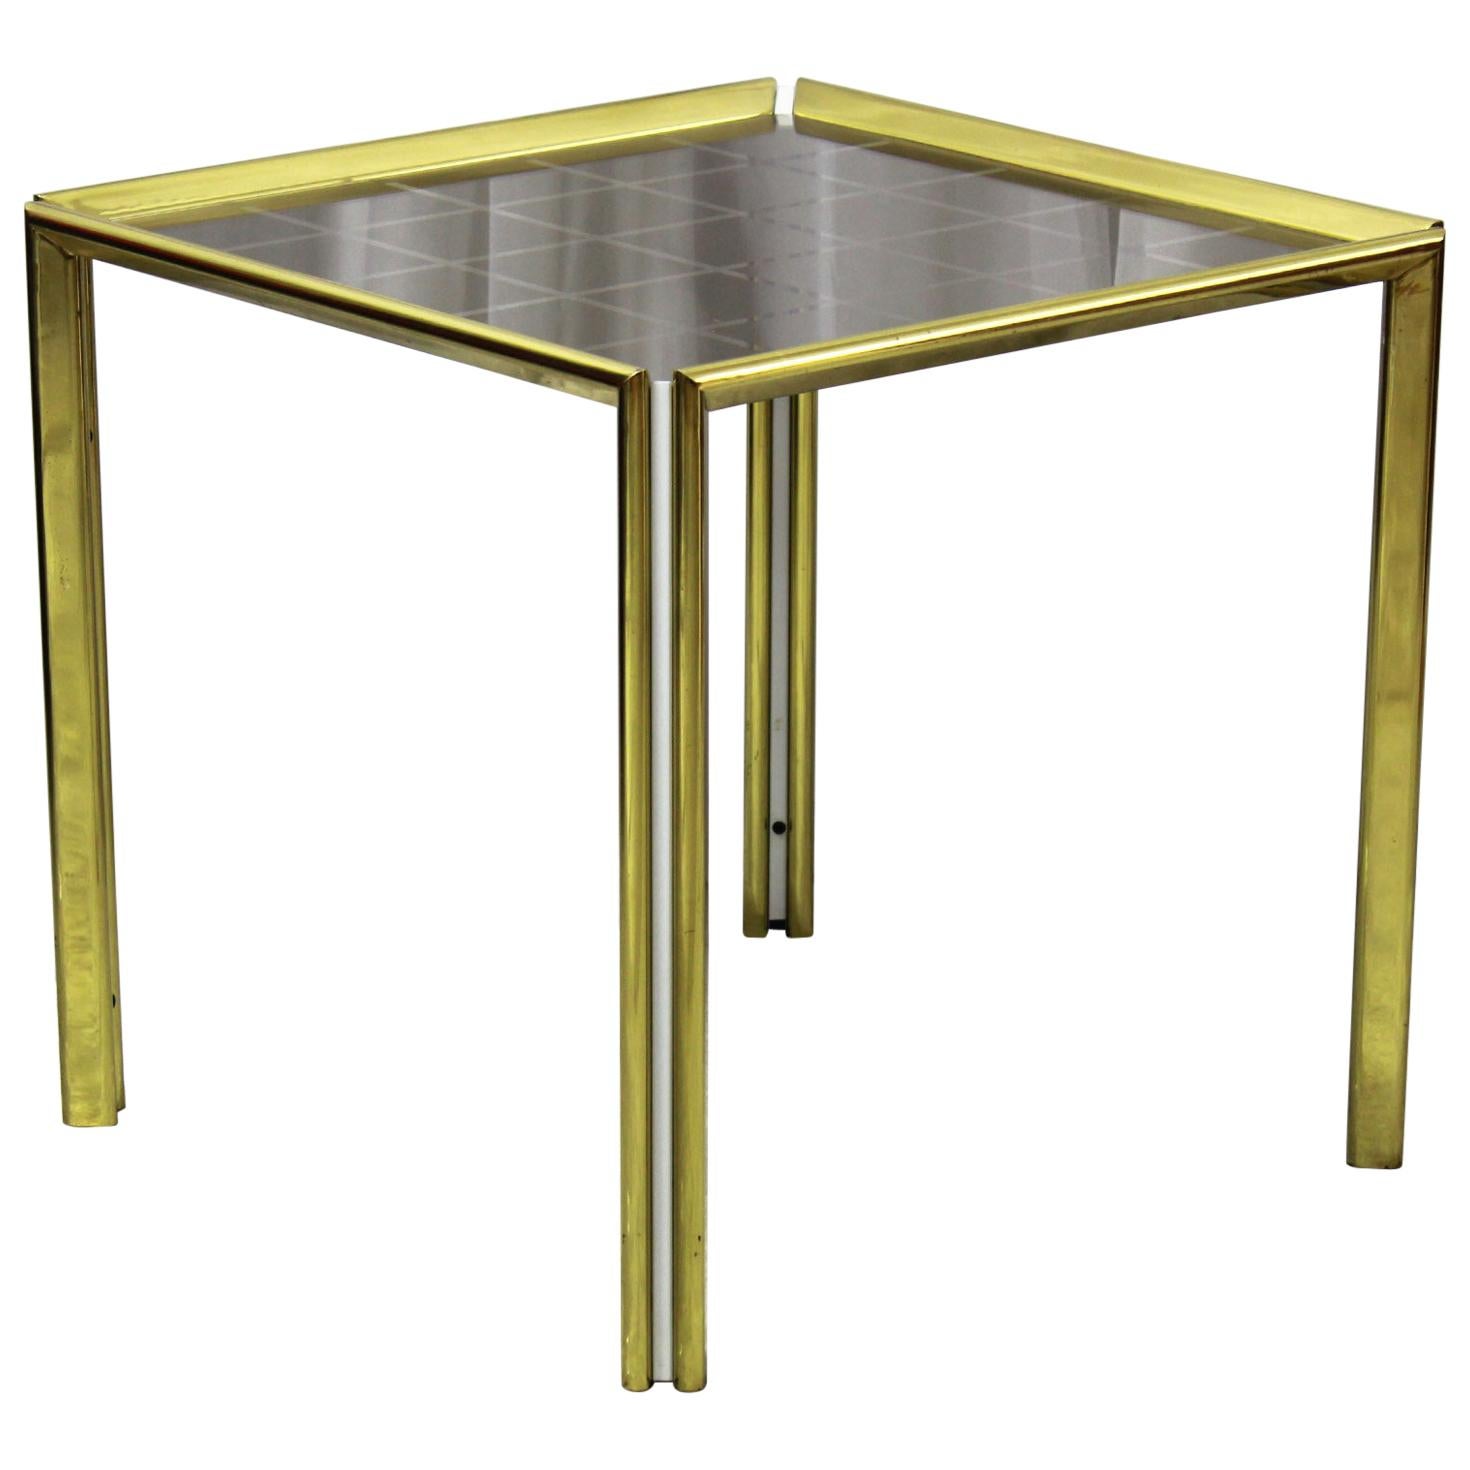 1970s Italian Vintage Goldenrod Iron and Glass Top Coffee Table